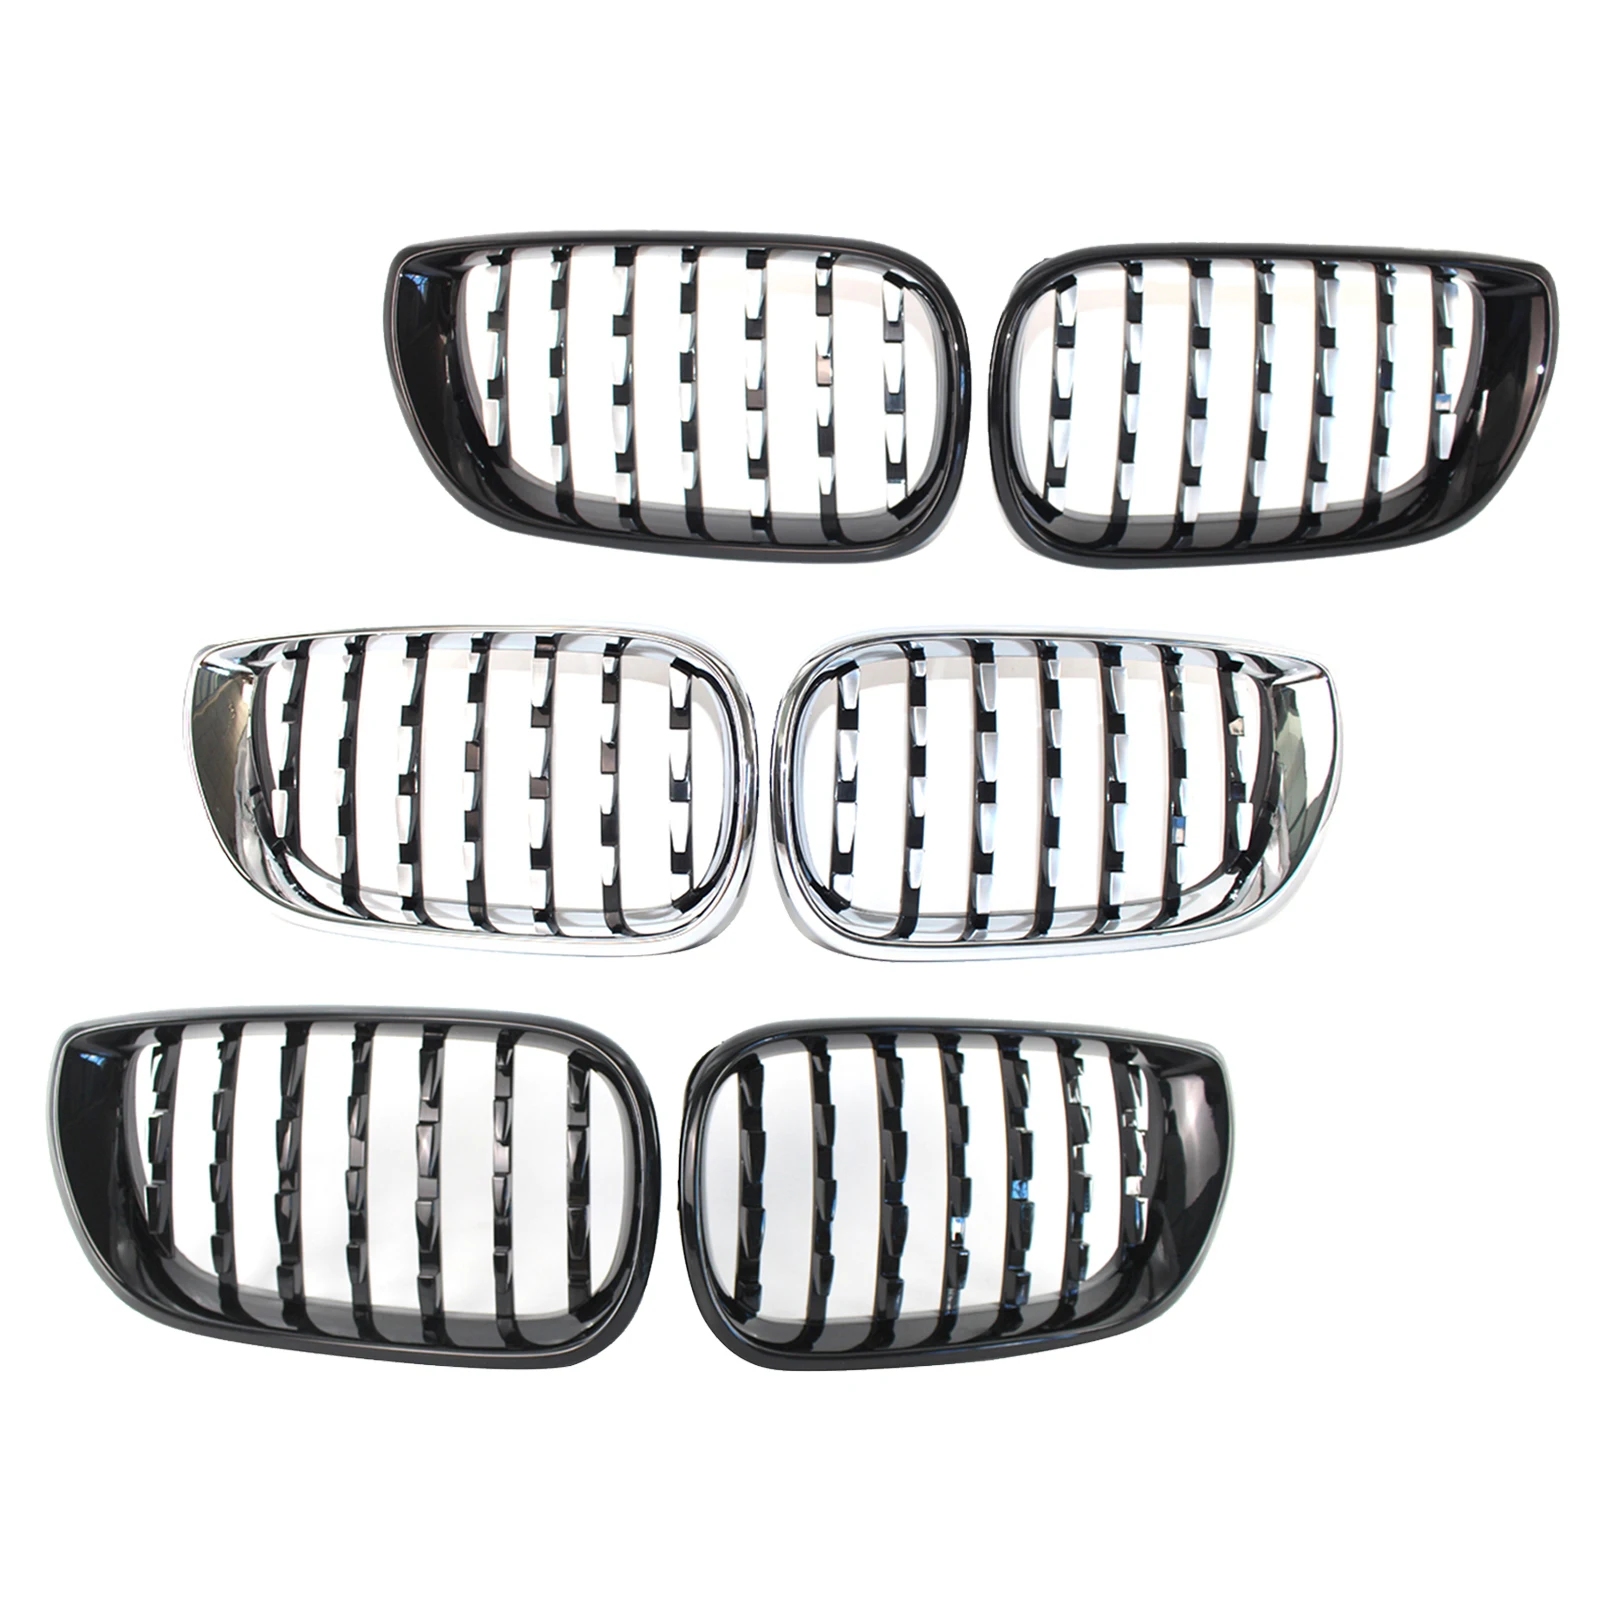 1 Pair of Car Front Kidney Grille Replace Fit for  3 Series E46 4-door 2002, 2003, 2004, 2005